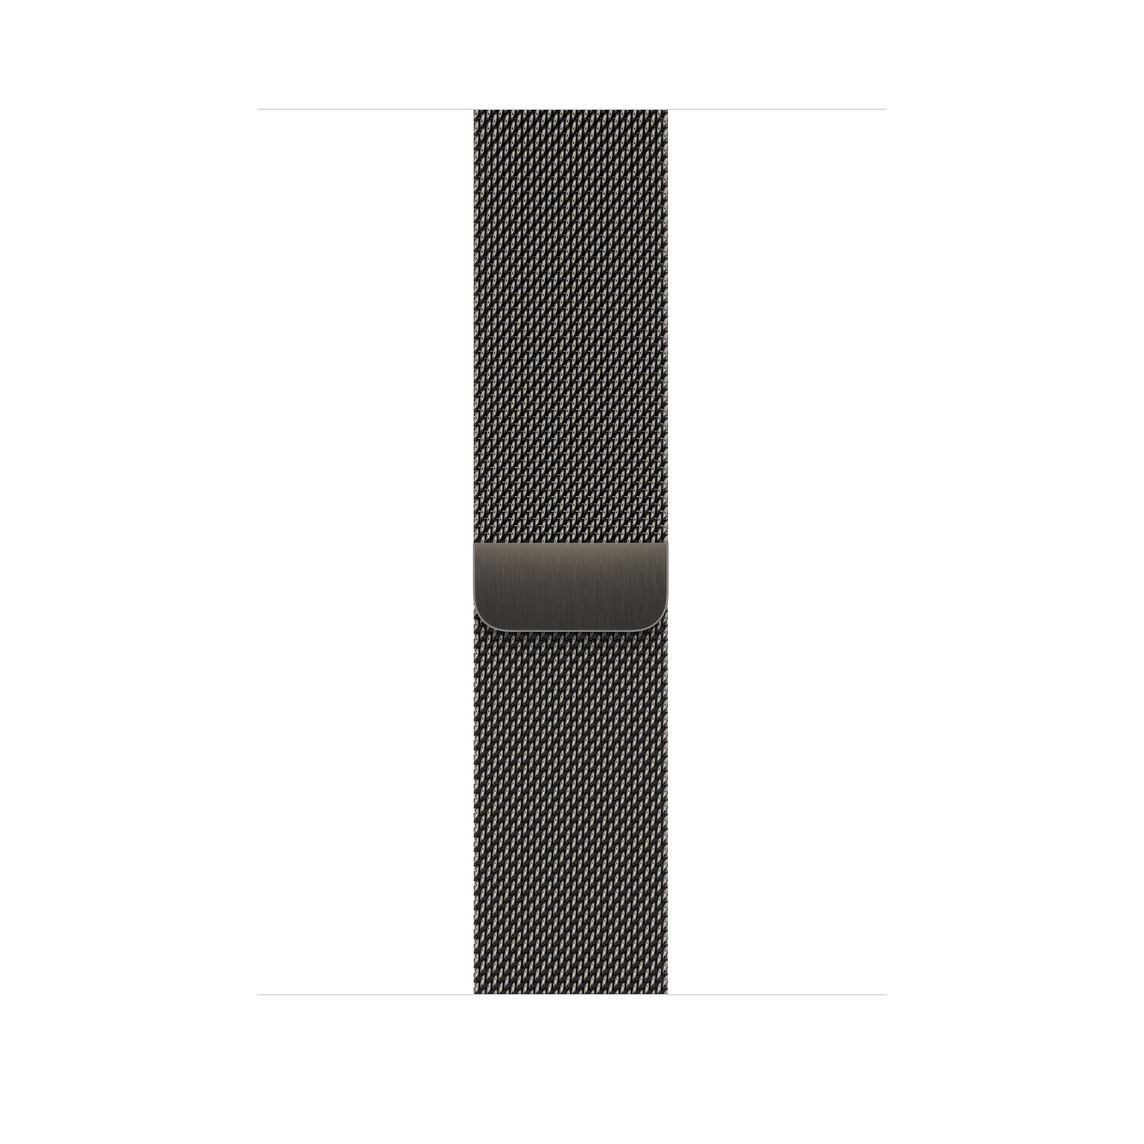 45mm Graphite Milanese Loop is fully magnetic and infinitely adjustable, ensuring a perfect fit.